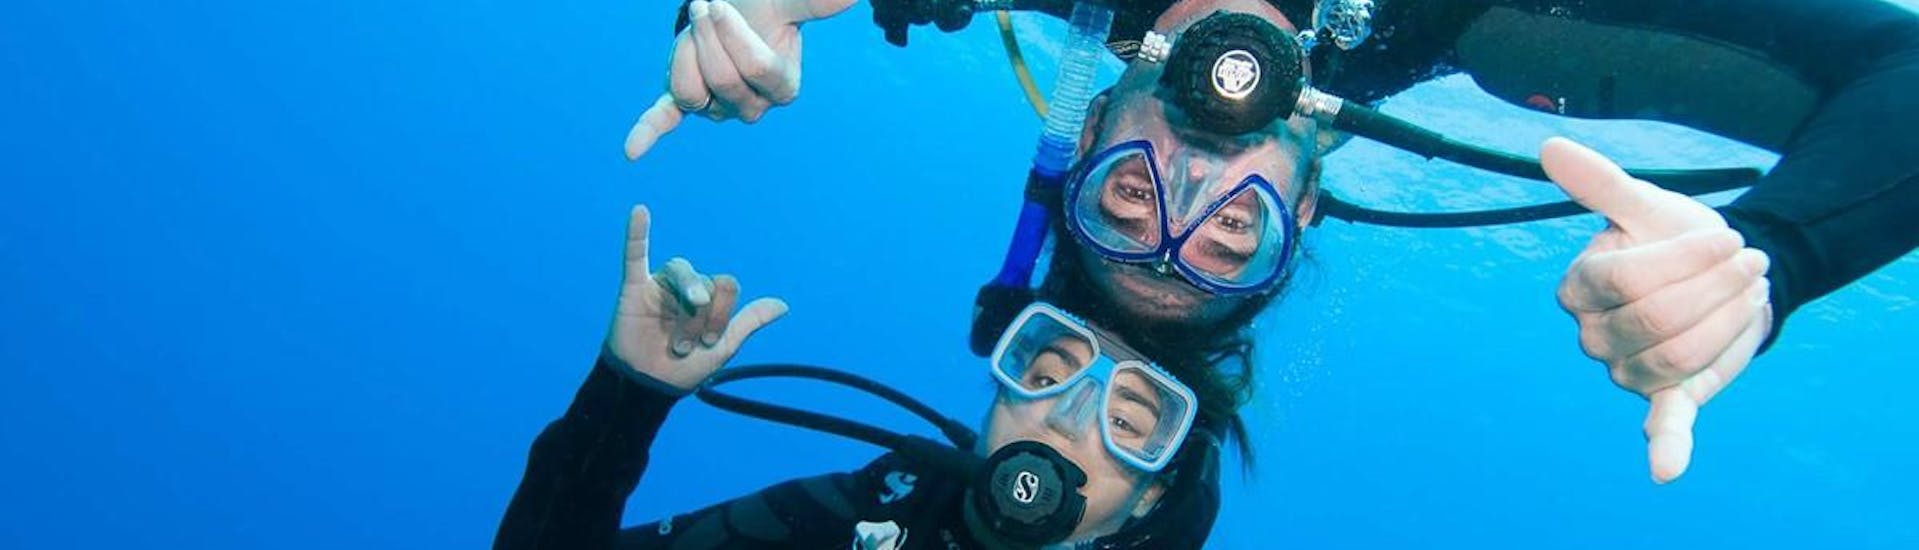 A couple has fun during one of our diving courses with Mandel Diving Centre Capoliveri.